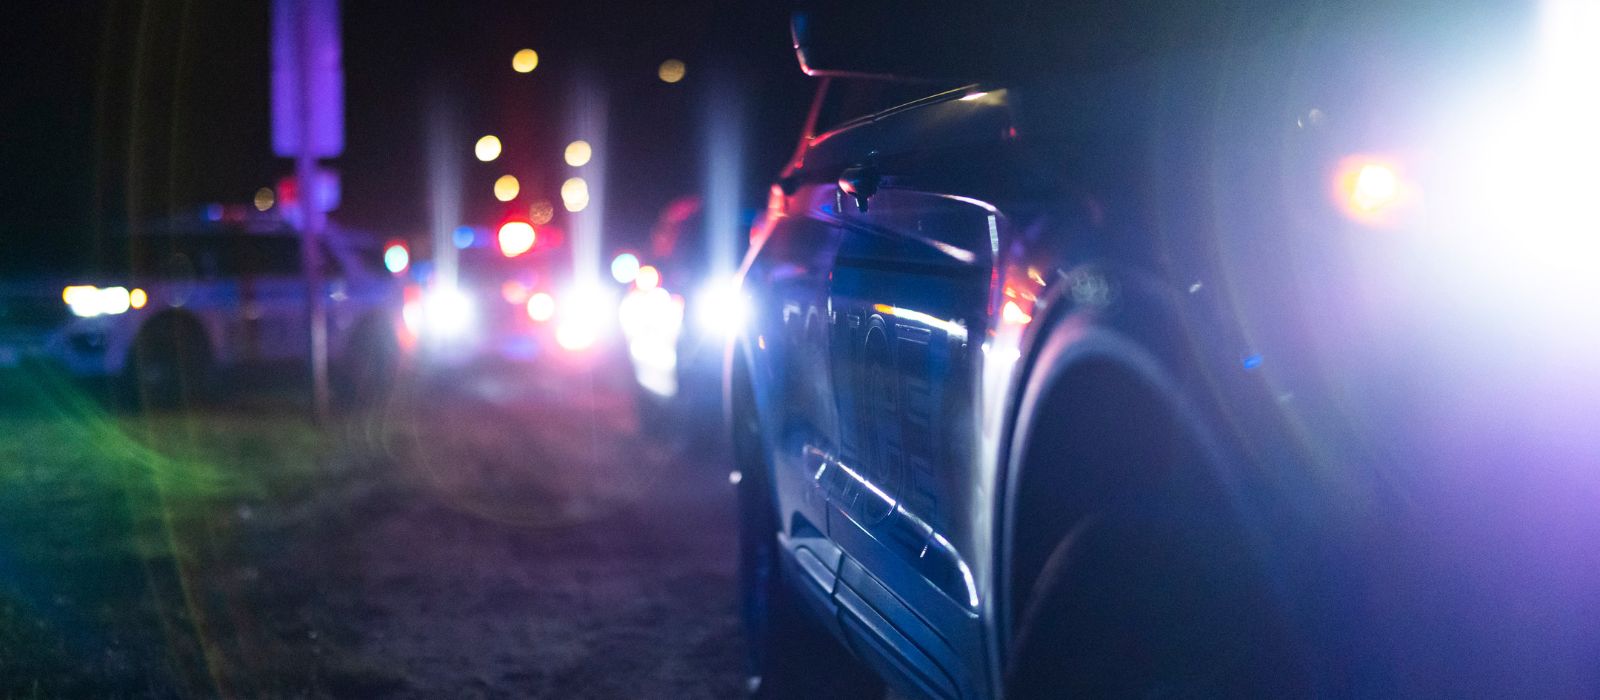 Several stopped police cruisers with their lights flashing at night.